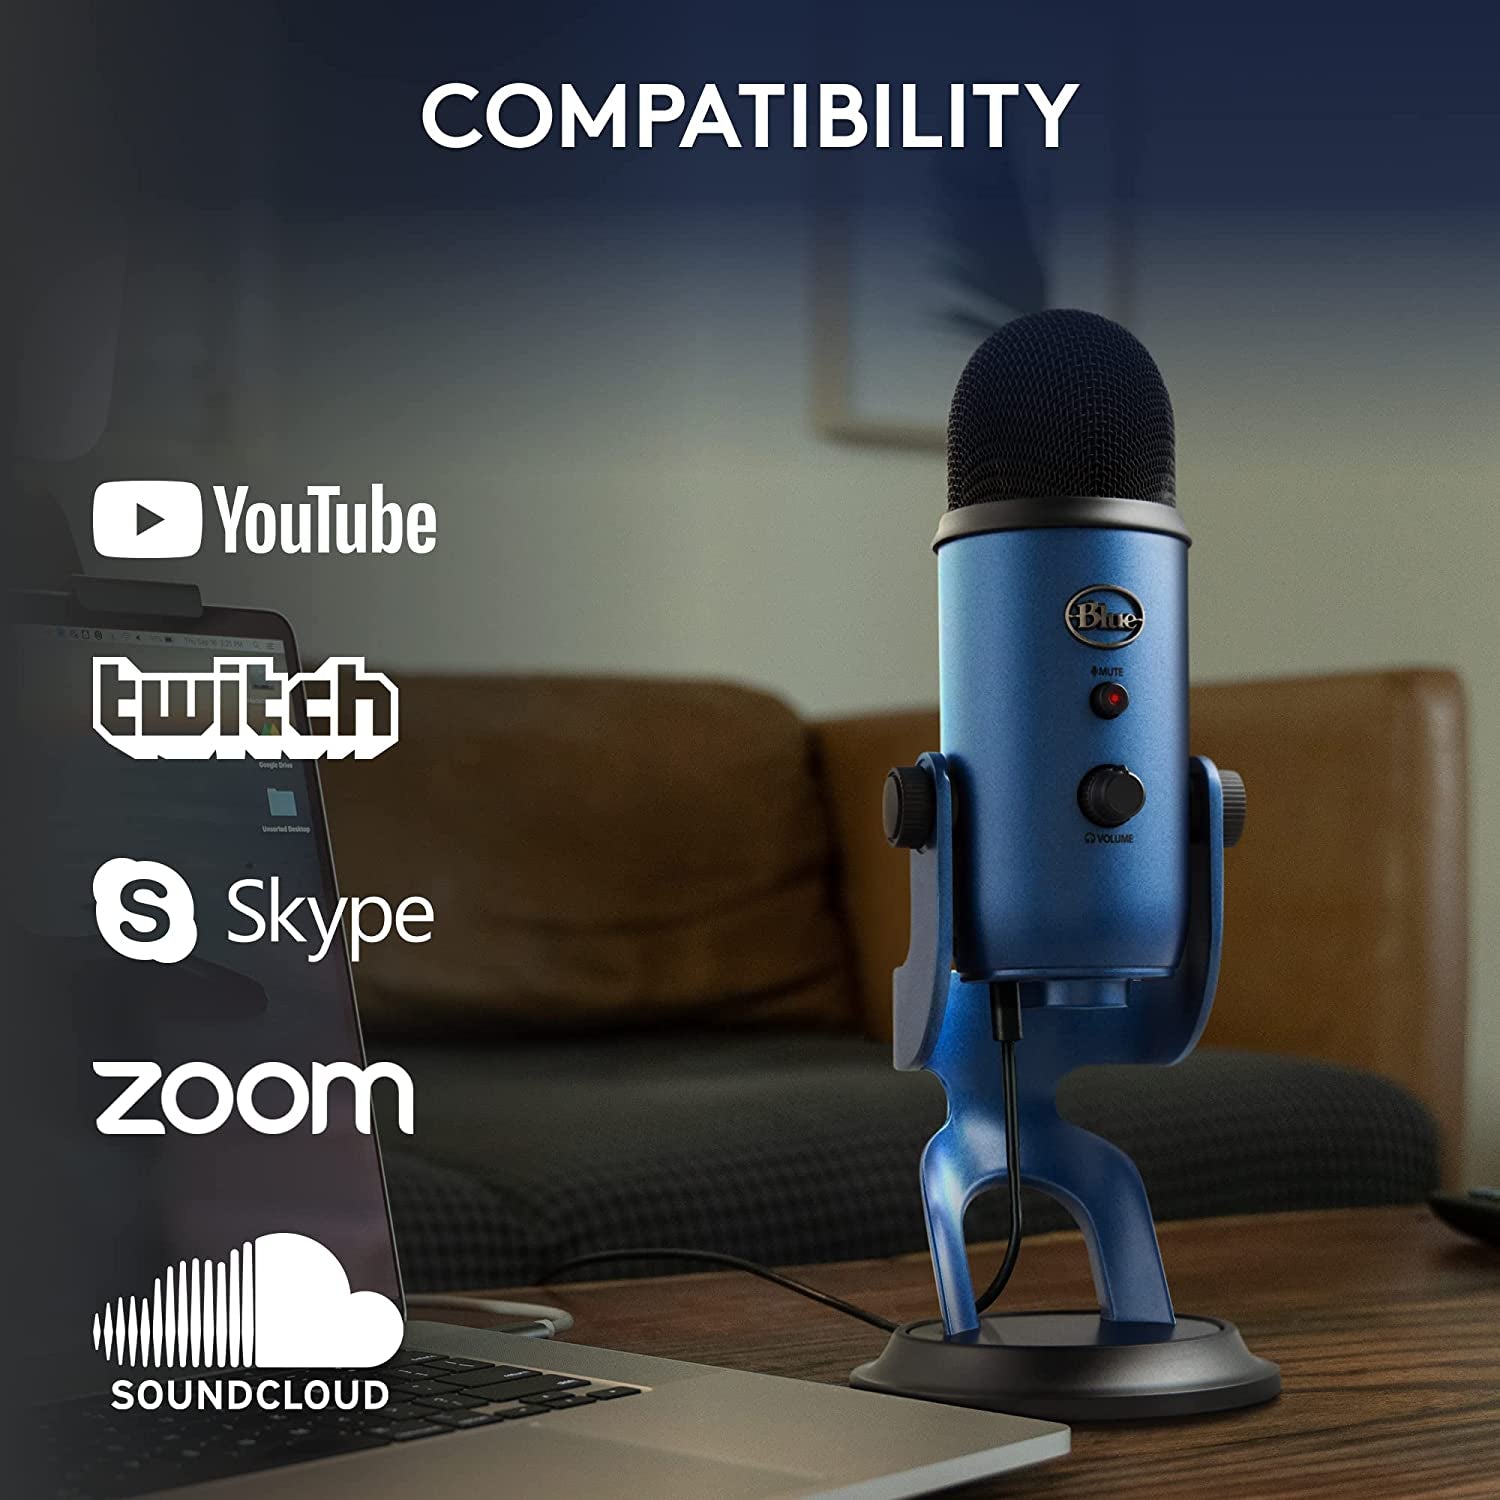 USB Microphone for PC and Mac, for Gaming, Recording, Streaming, Podcasting, and Studio Use, Enhanced Voice Effects, Versatile Pickup Patterns, Plug and Play